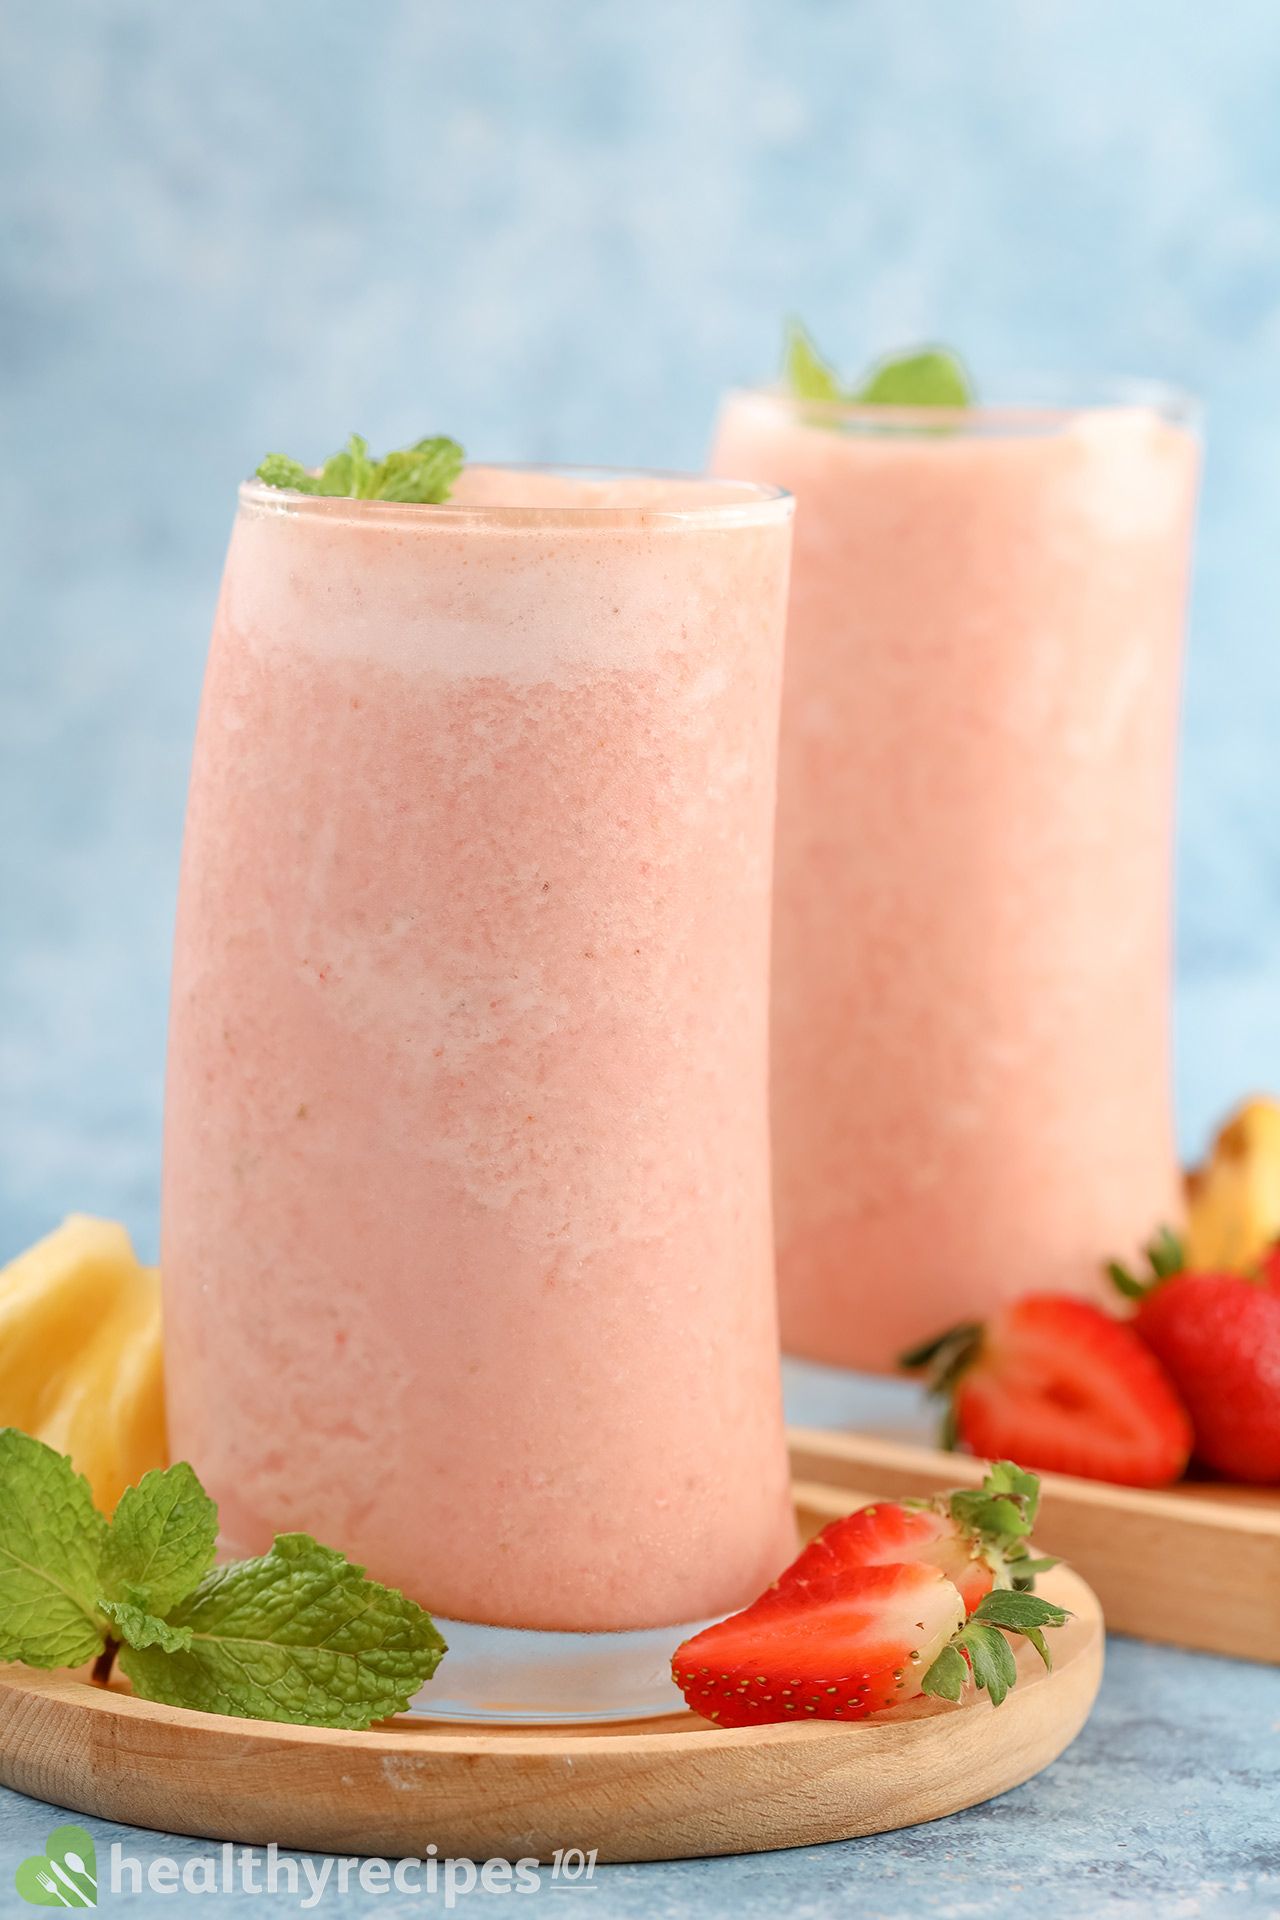 How Long Does Strawberry Pineapple Smoothie Last